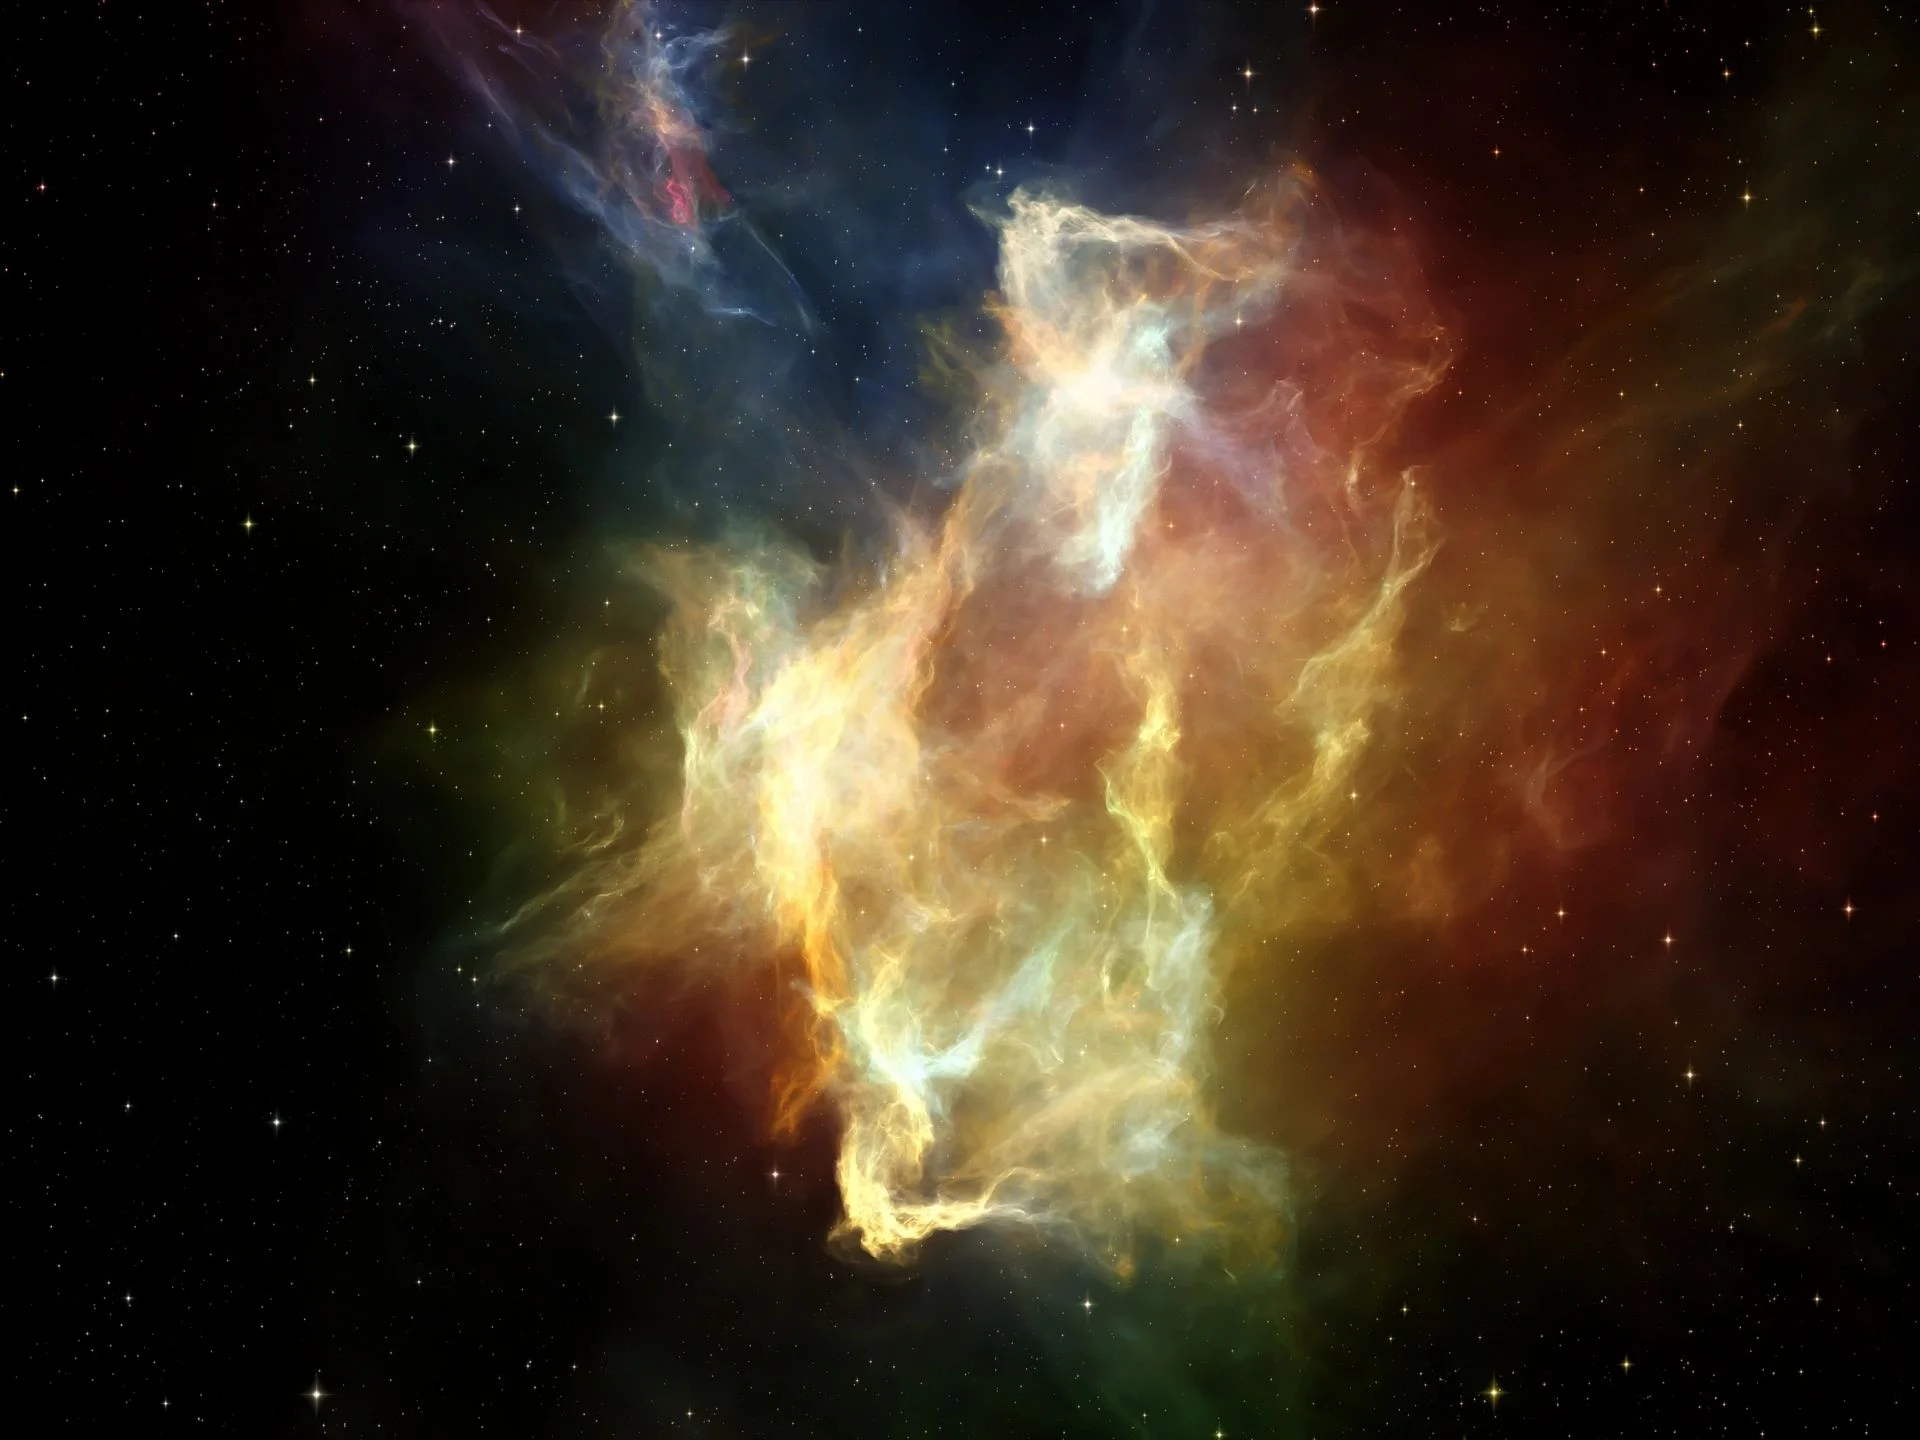 A colorful nebula in space.